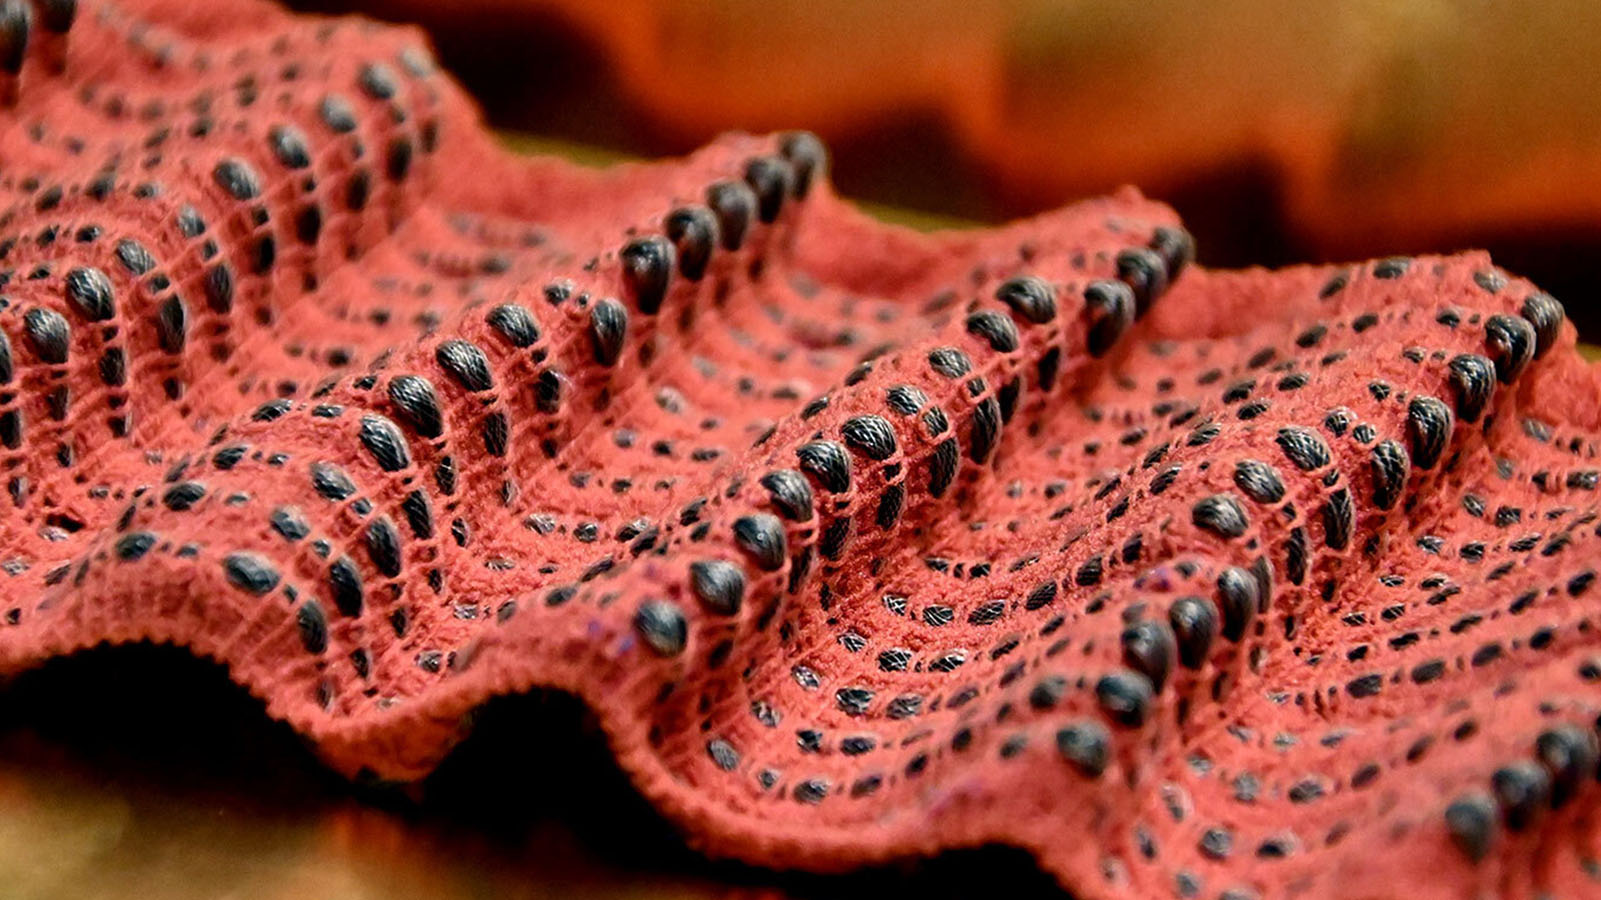 Fabrics like this, woven from soft robotic fibers that can sense and respond to their own
deformation, could be made into garments that
provide tactile feedback, guiding a wearer’s breath and body position.